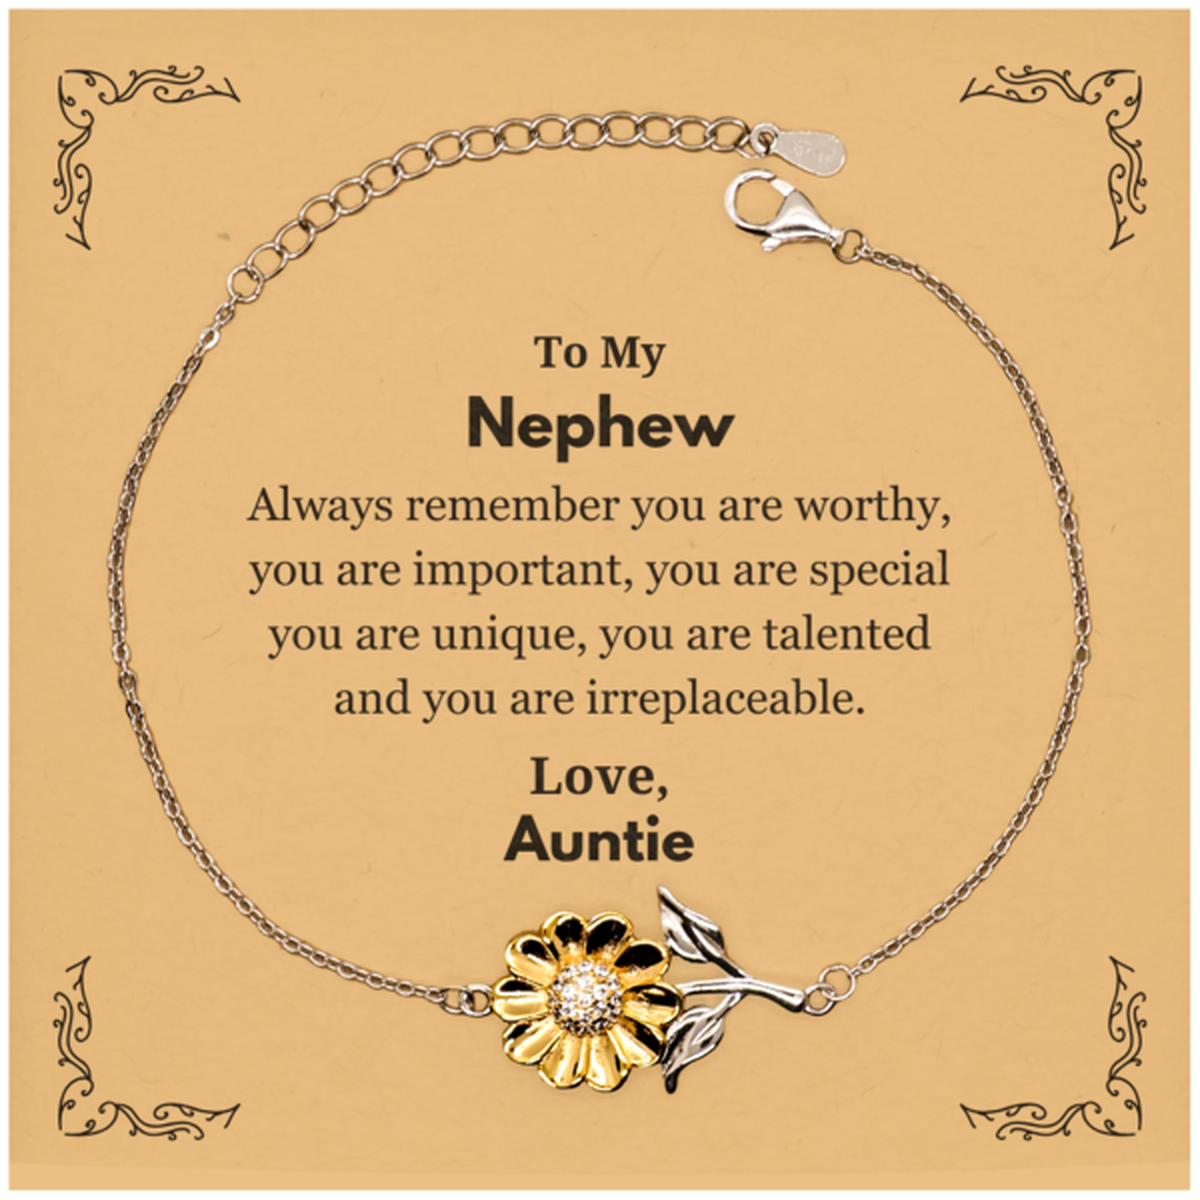 Nephew Birthday Gifts from Auntie, Inspirational Sunflower Bracelet for Nephew Christmas Graduation Gifts for Nephew Always remember you are worthy, you are important. Love, Auntie